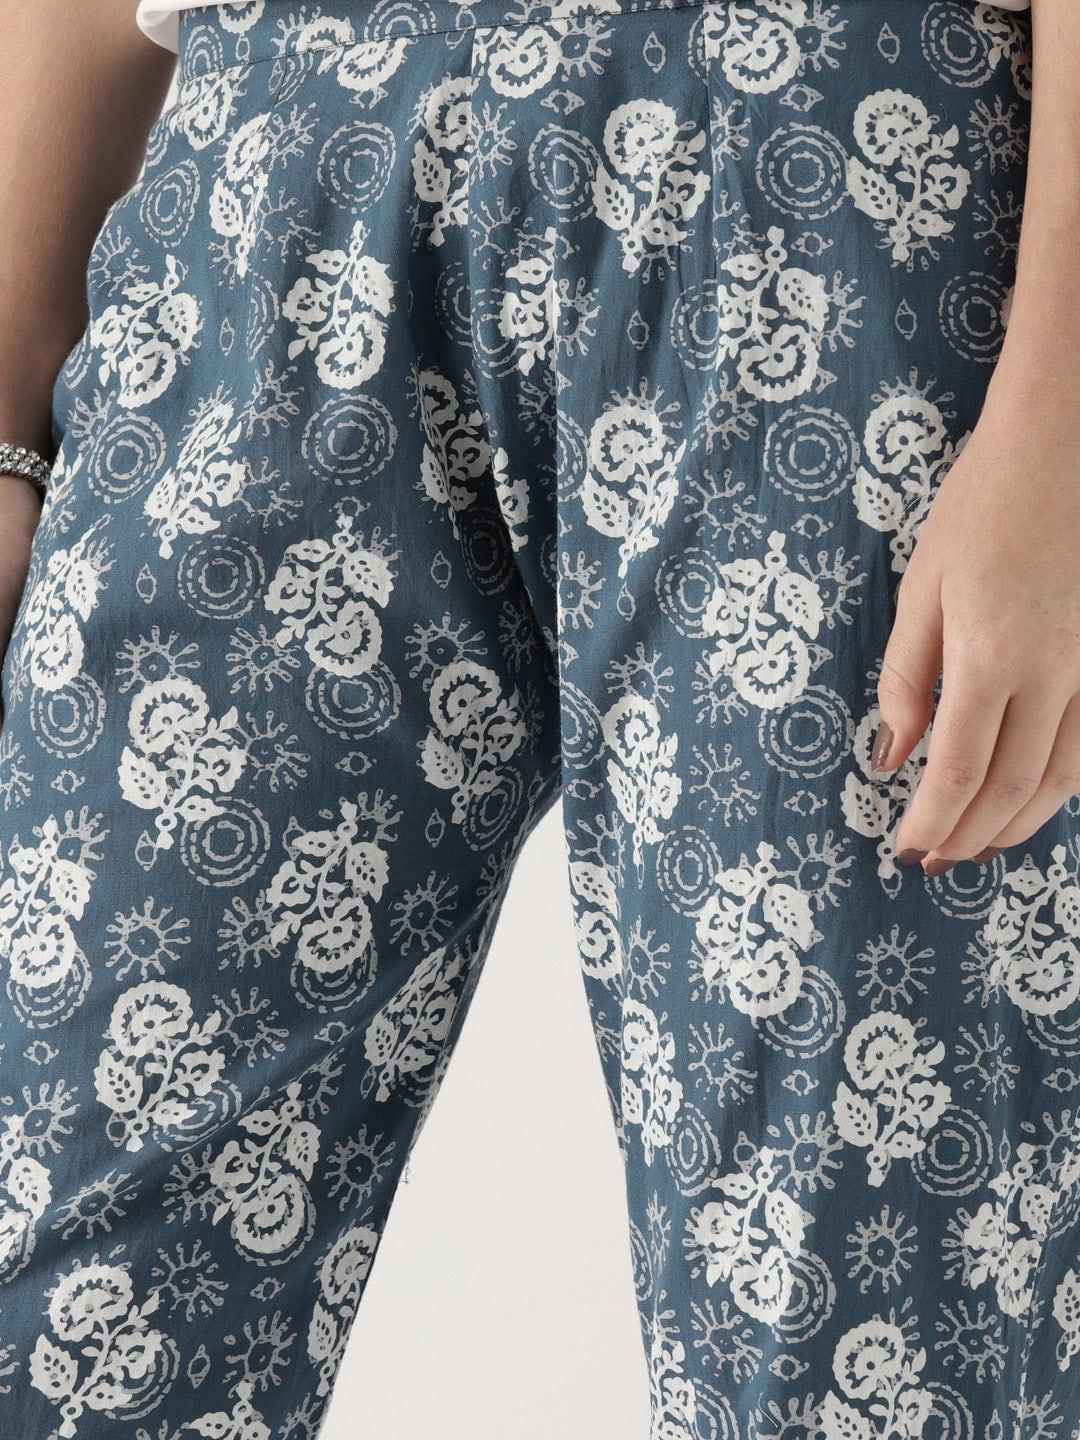 Blue Printed Cotton Trousers - Libas